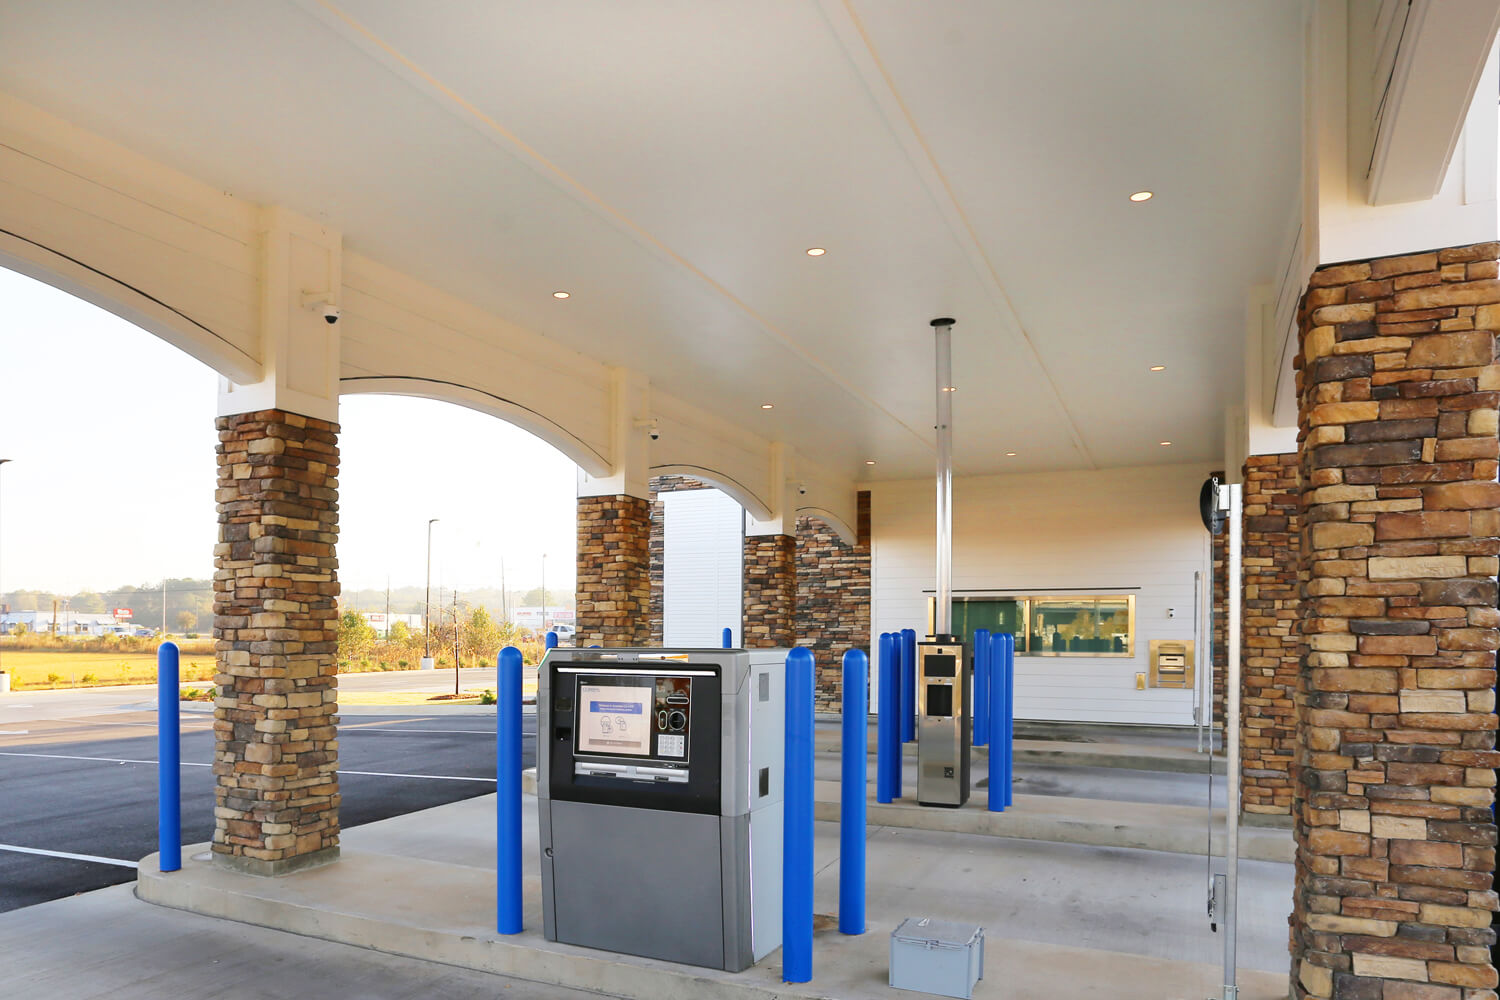 Guardian Credit Union - Wetumpka - Covered Drive Thru - Designed by Foshee Architecture